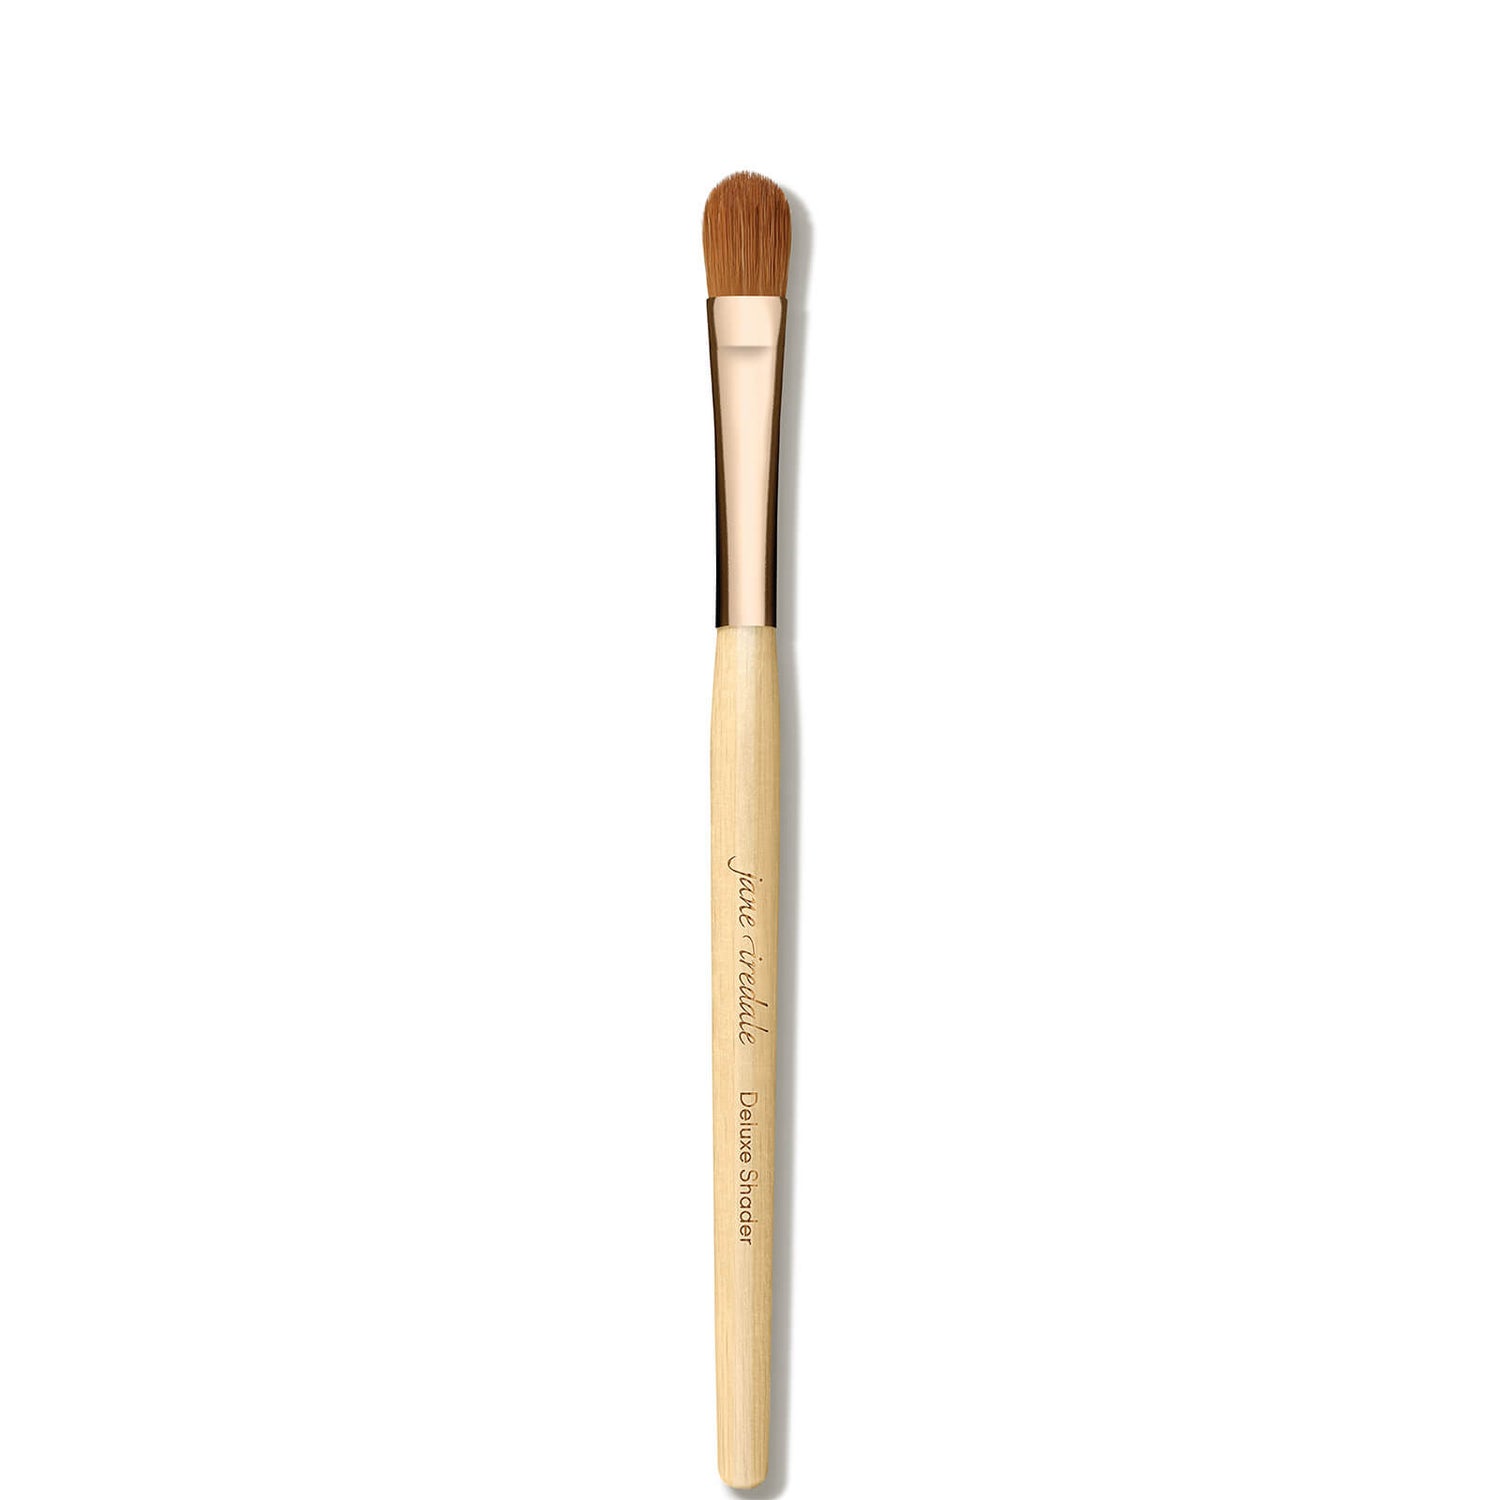 jane iredale Deluxe Shader Brush (1 piece)